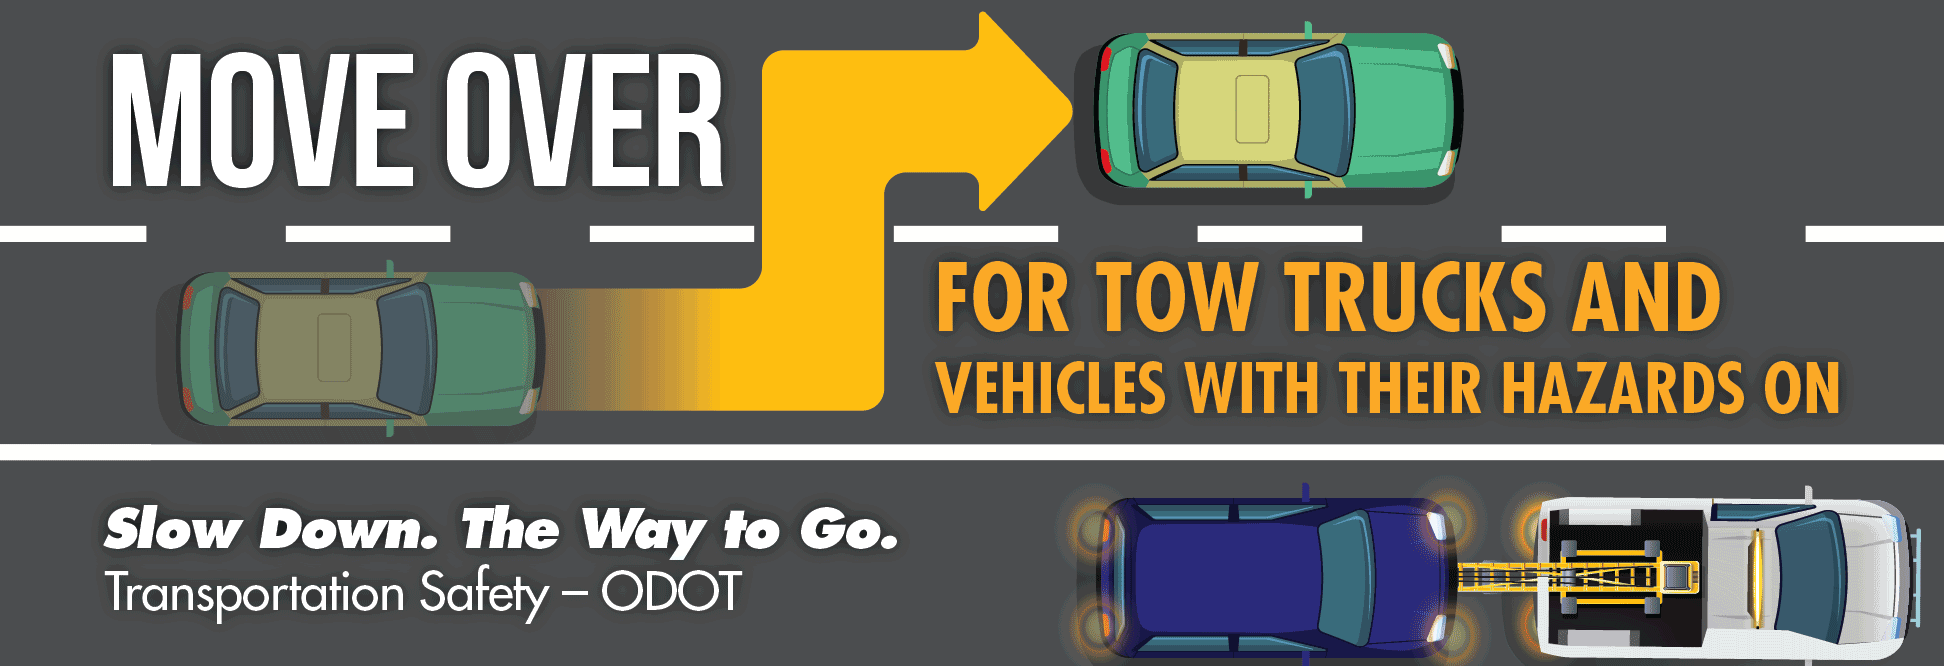 Move over. For Tow Trucks and vehicles with their hazards on, for Emergency Responders, for ODOT Maintenance.